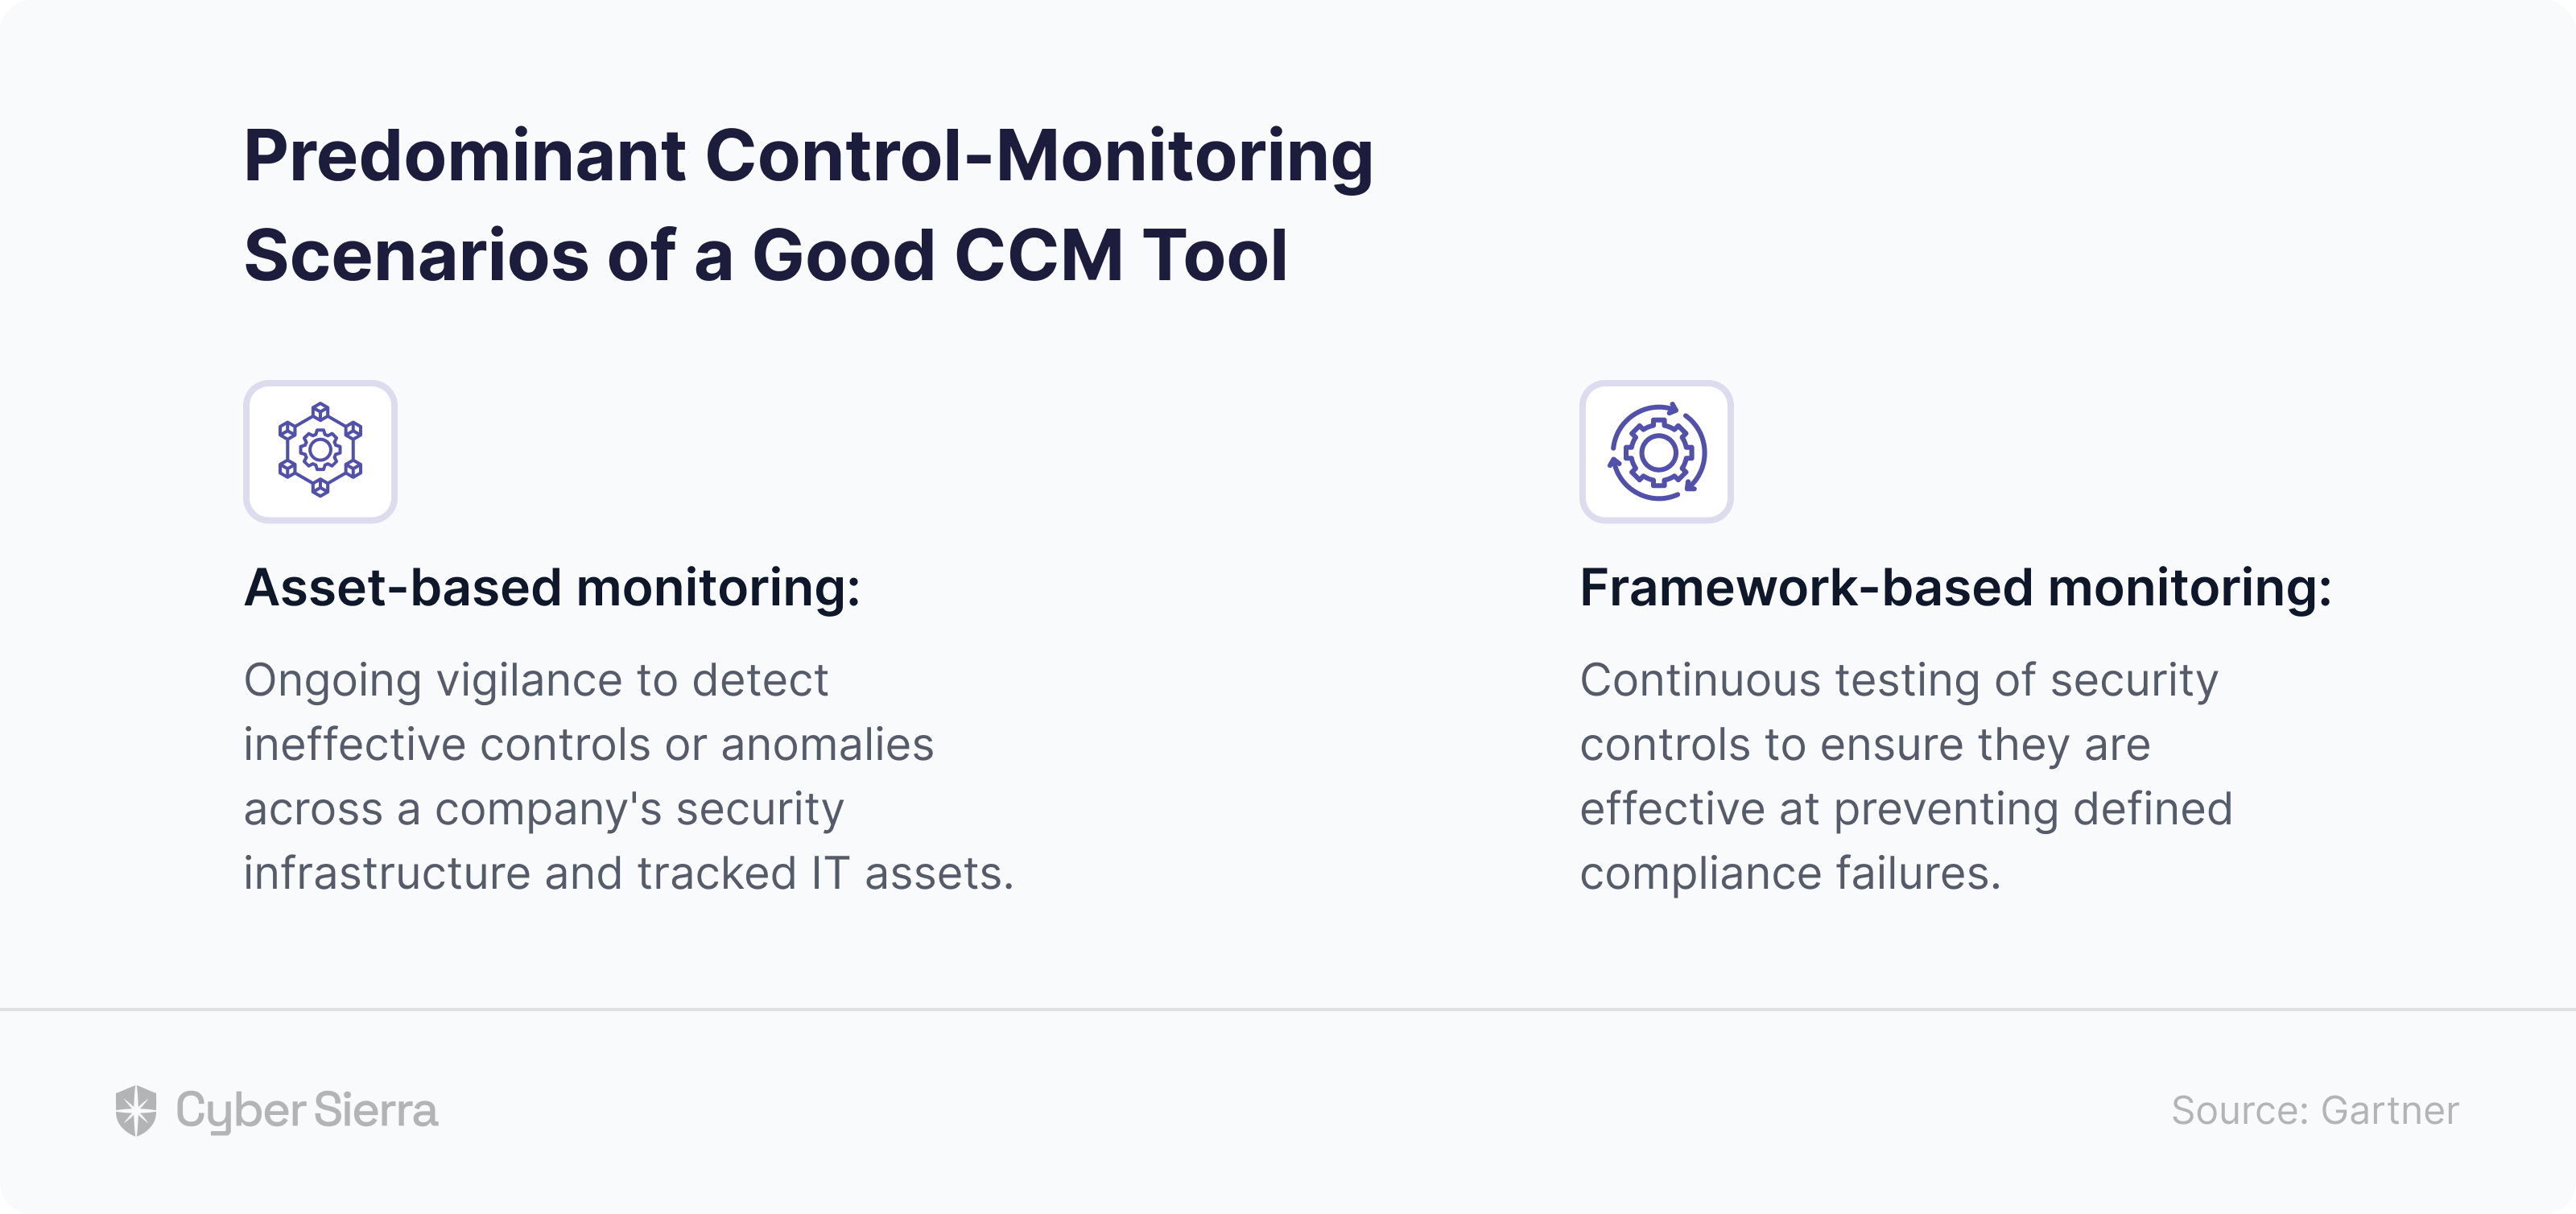 A CCM tool should support implementation activities throughout all phases of the continuous control monitoring lifecycle